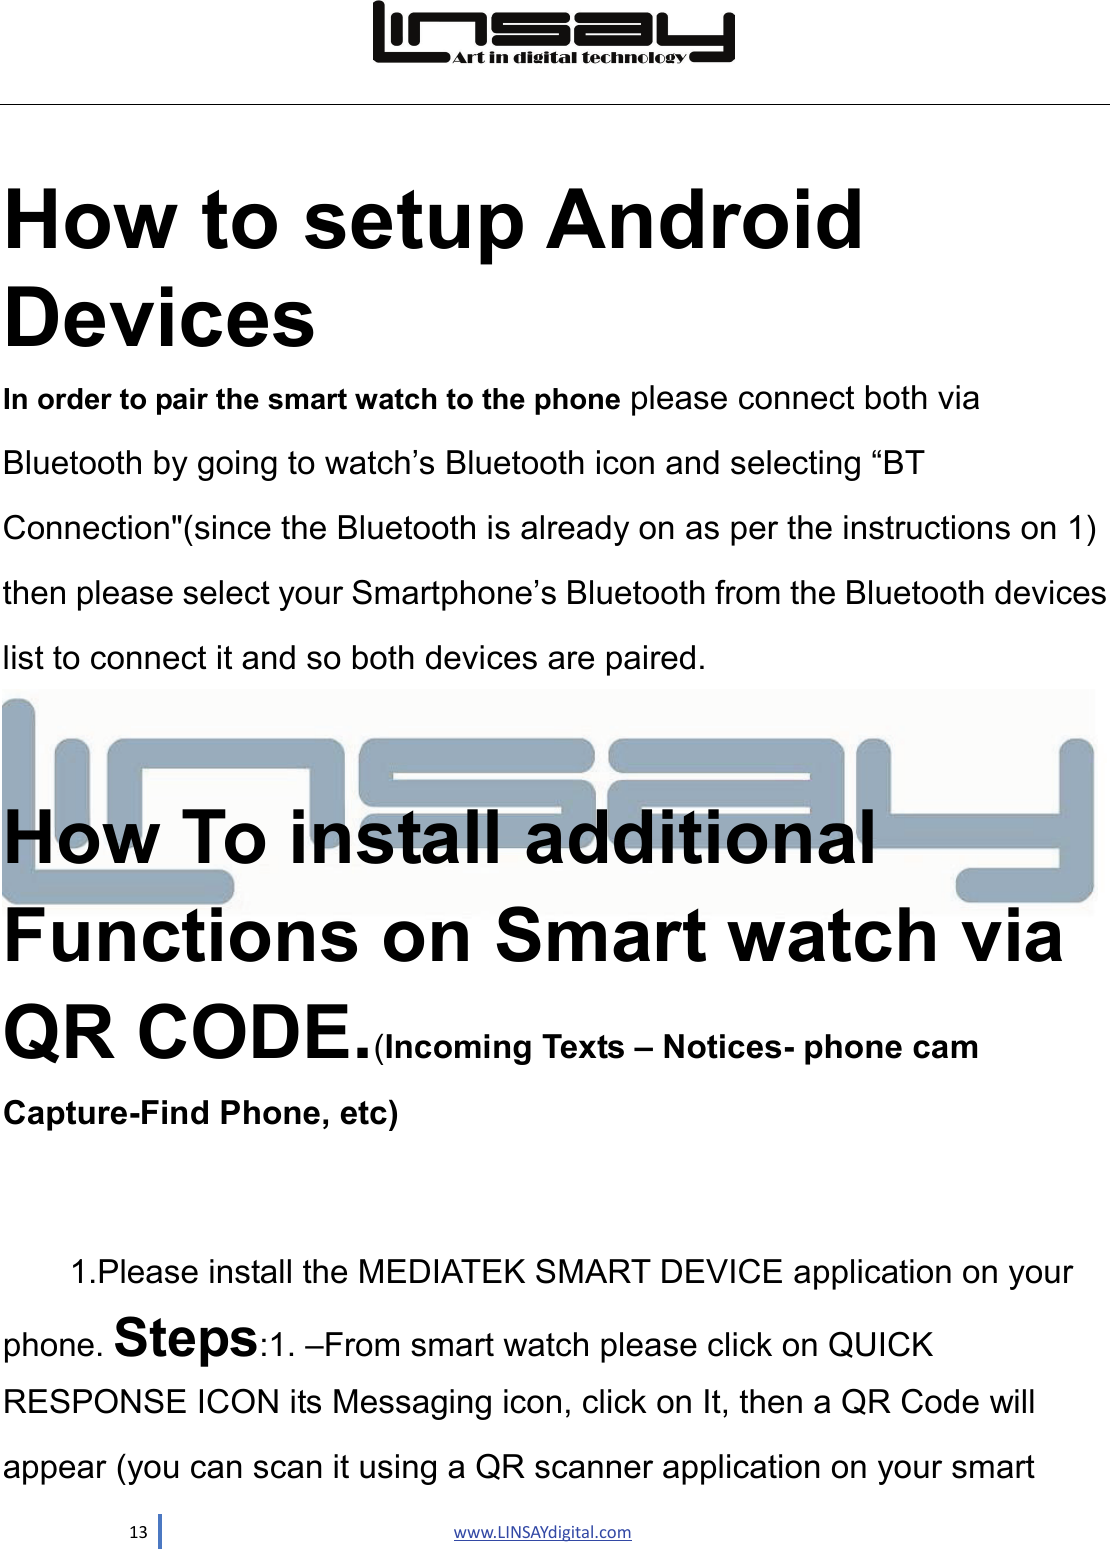  13                               www.LINSAYdigital.com   How to setup Android Devices  In order to pair the smart watch to the phone please connect both via Bluetooth by going to watch’s Bluetooth icon and selecting “BT Connection&quot;(since the Bluetooth is already on as per the instructions on 1) then please select your Smartphone’s Bluetooth from the Bluetooth devices list to connect it and so both devices are paired.  How To install additional Functions on Smart watch via QR CODE.(Incoming Texts – Notices- phone cam Capture-Find Phone, etc)    1.Please install the MEDIATEK SMART DEVICE application on your phone. Steps:1. –From smart watch please click on QUICK RESPONSE ICON its Messaging icon, click on It, then a QR Code will appear (you can scan it using a QR scanner application on your smart   